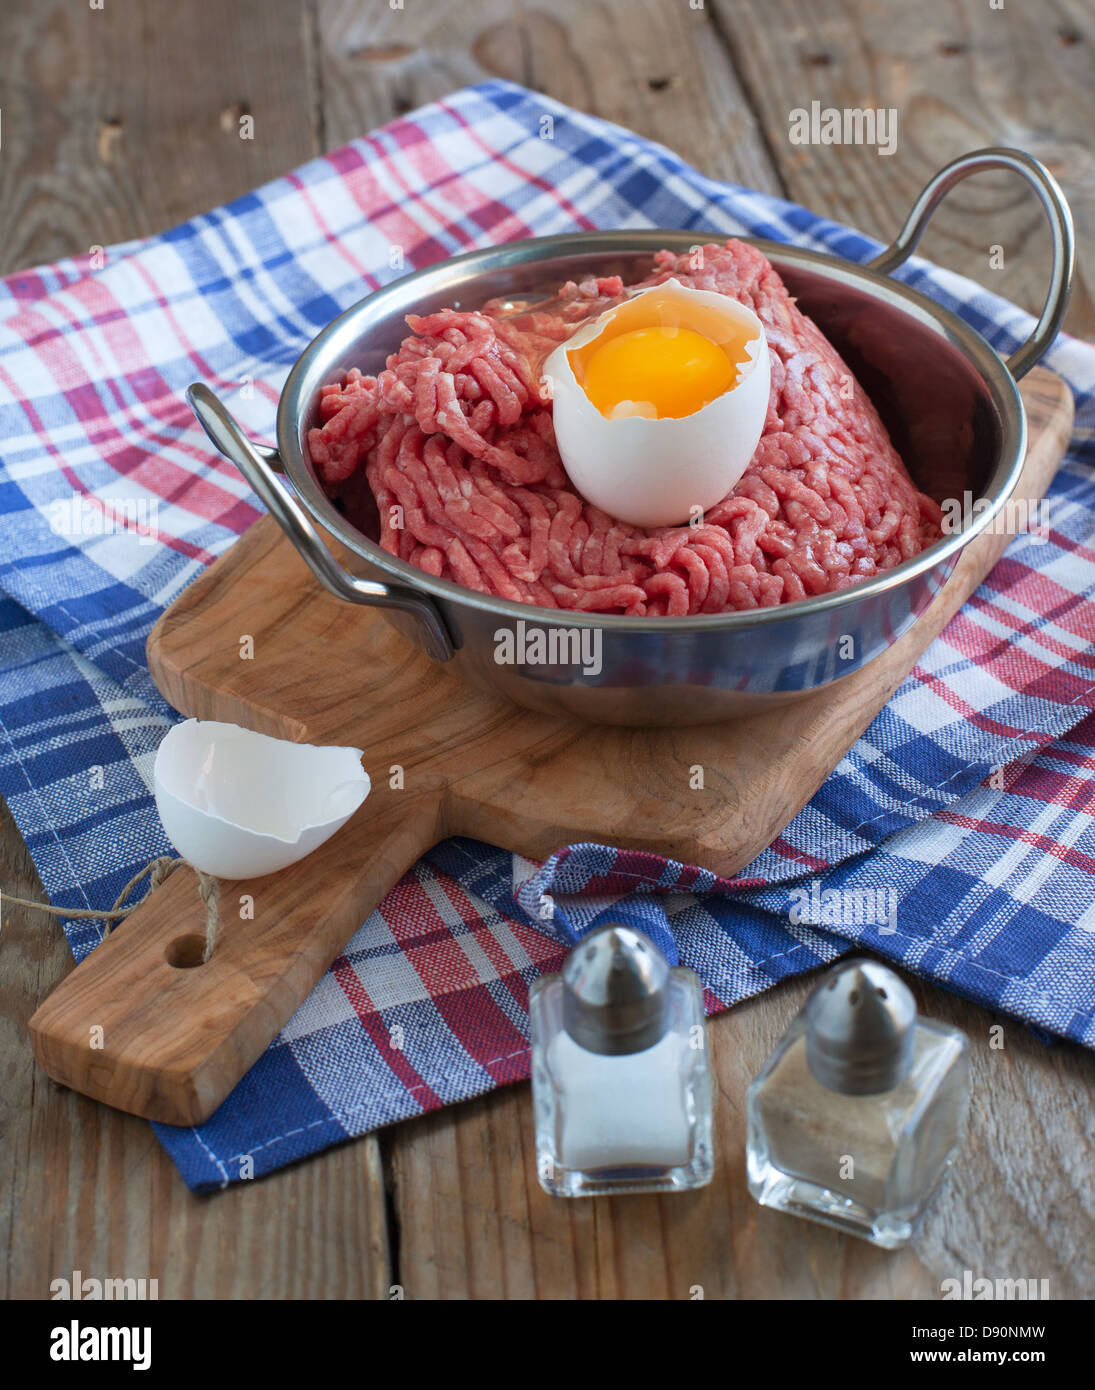 Ground beef ready for meat ball or meat loaf Stock Photo